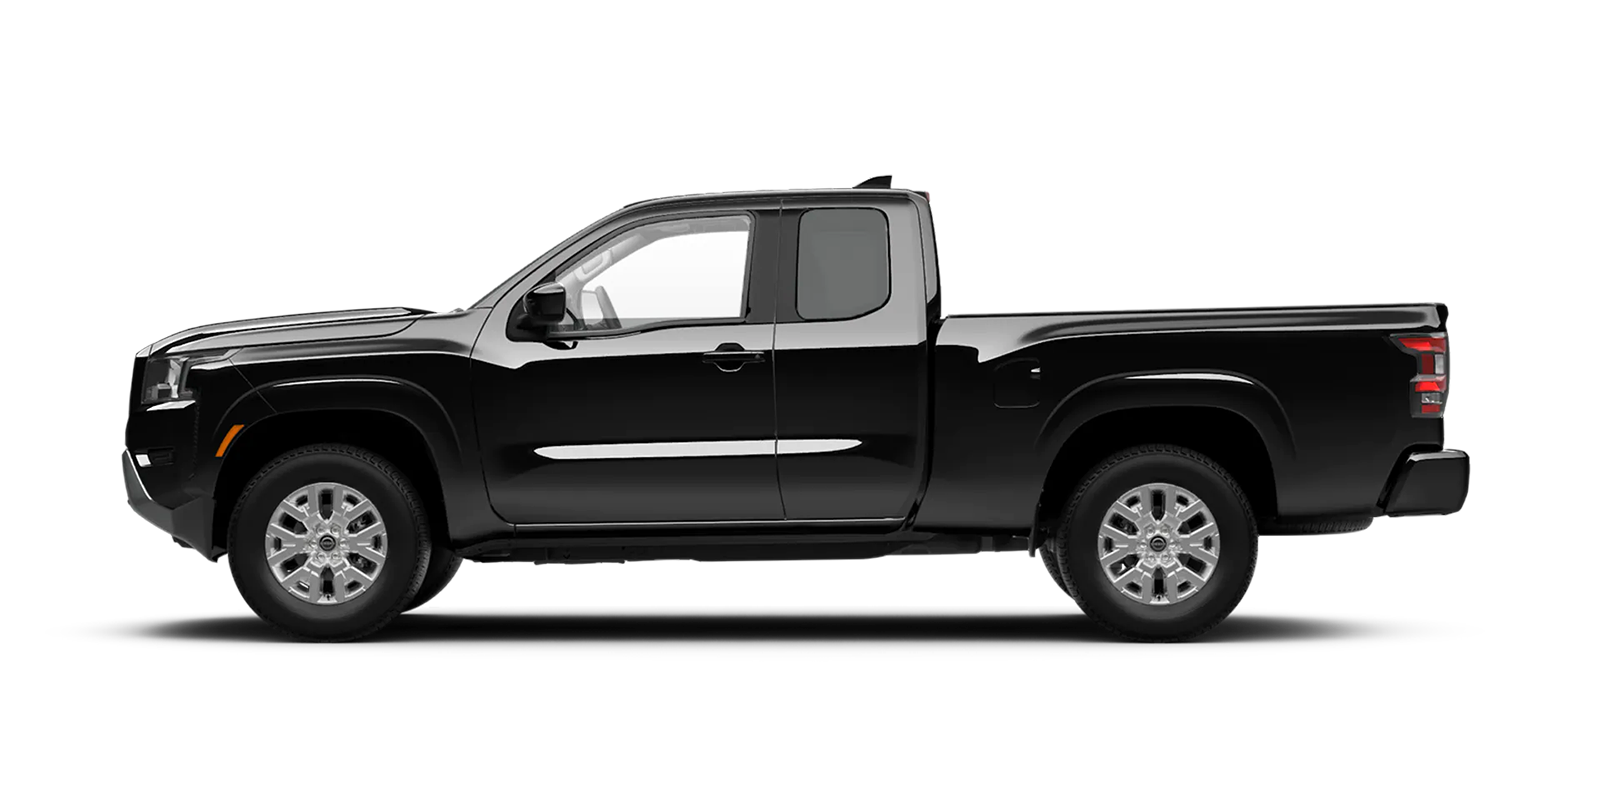 2022 Frontier King Cab SV 4x2 in Super Black | Greenway Nissan of Florence in Florence AL